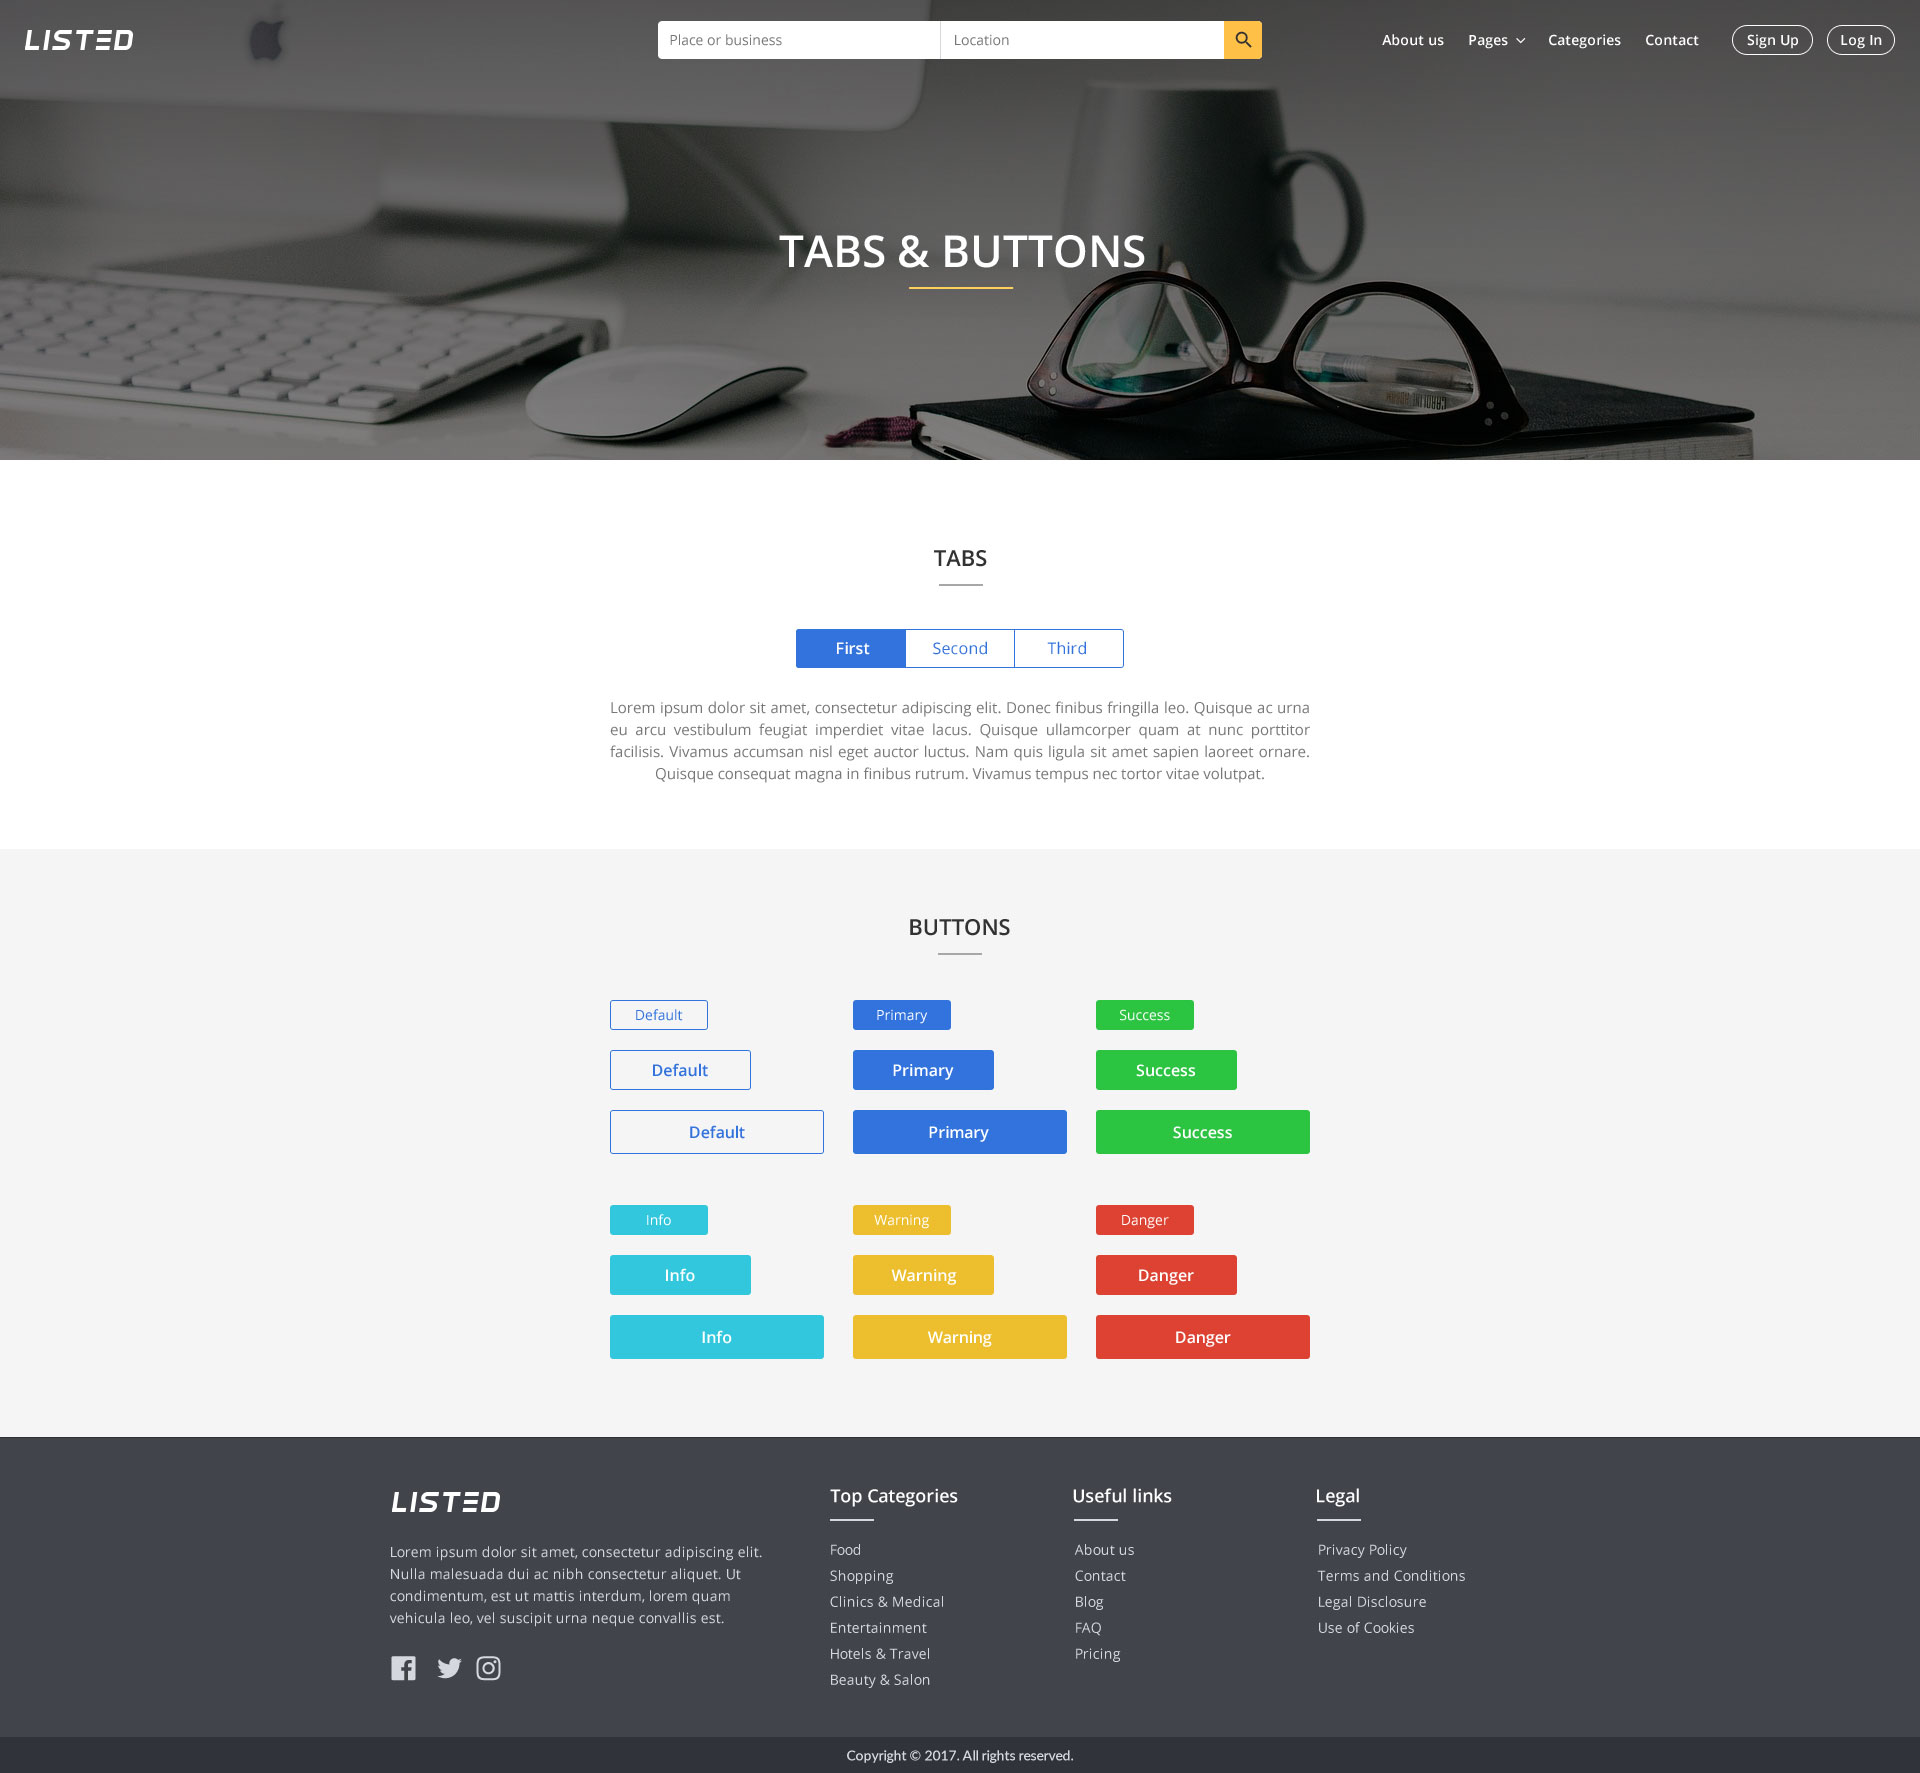 Dribbble - 50_elements_tabs_buttons_page_mobile.jpg by Razvan Bei